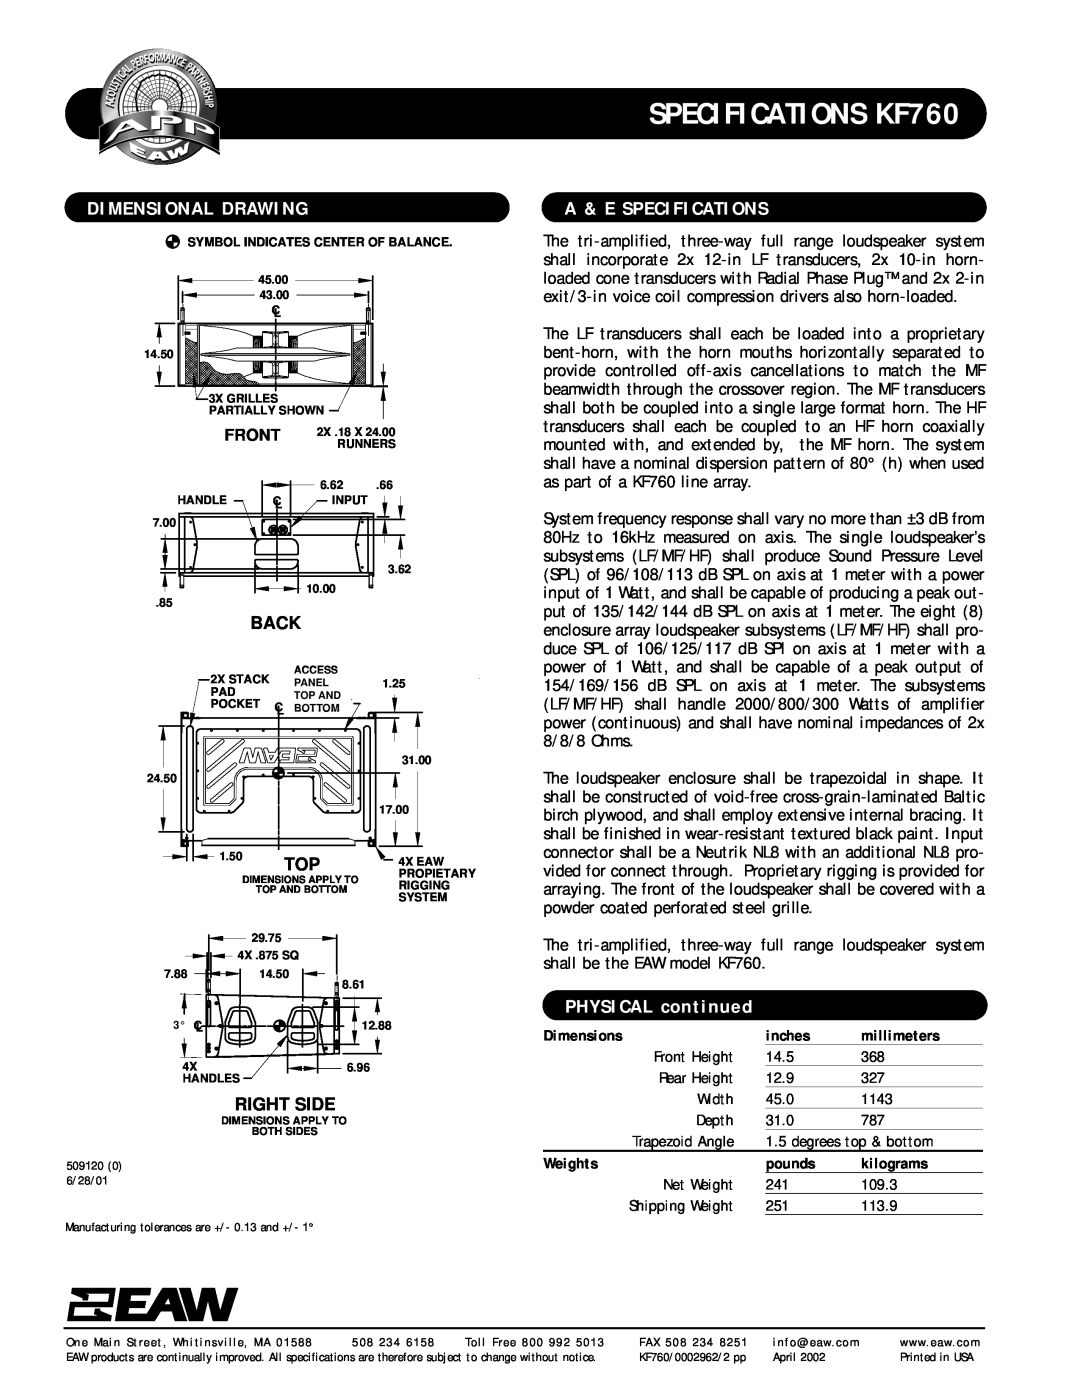 EAW specifications Dimensional Drawing, A & E Specifications, PHYSICAL continued, SPECIFICATIONS KF760, Back, Right Side 